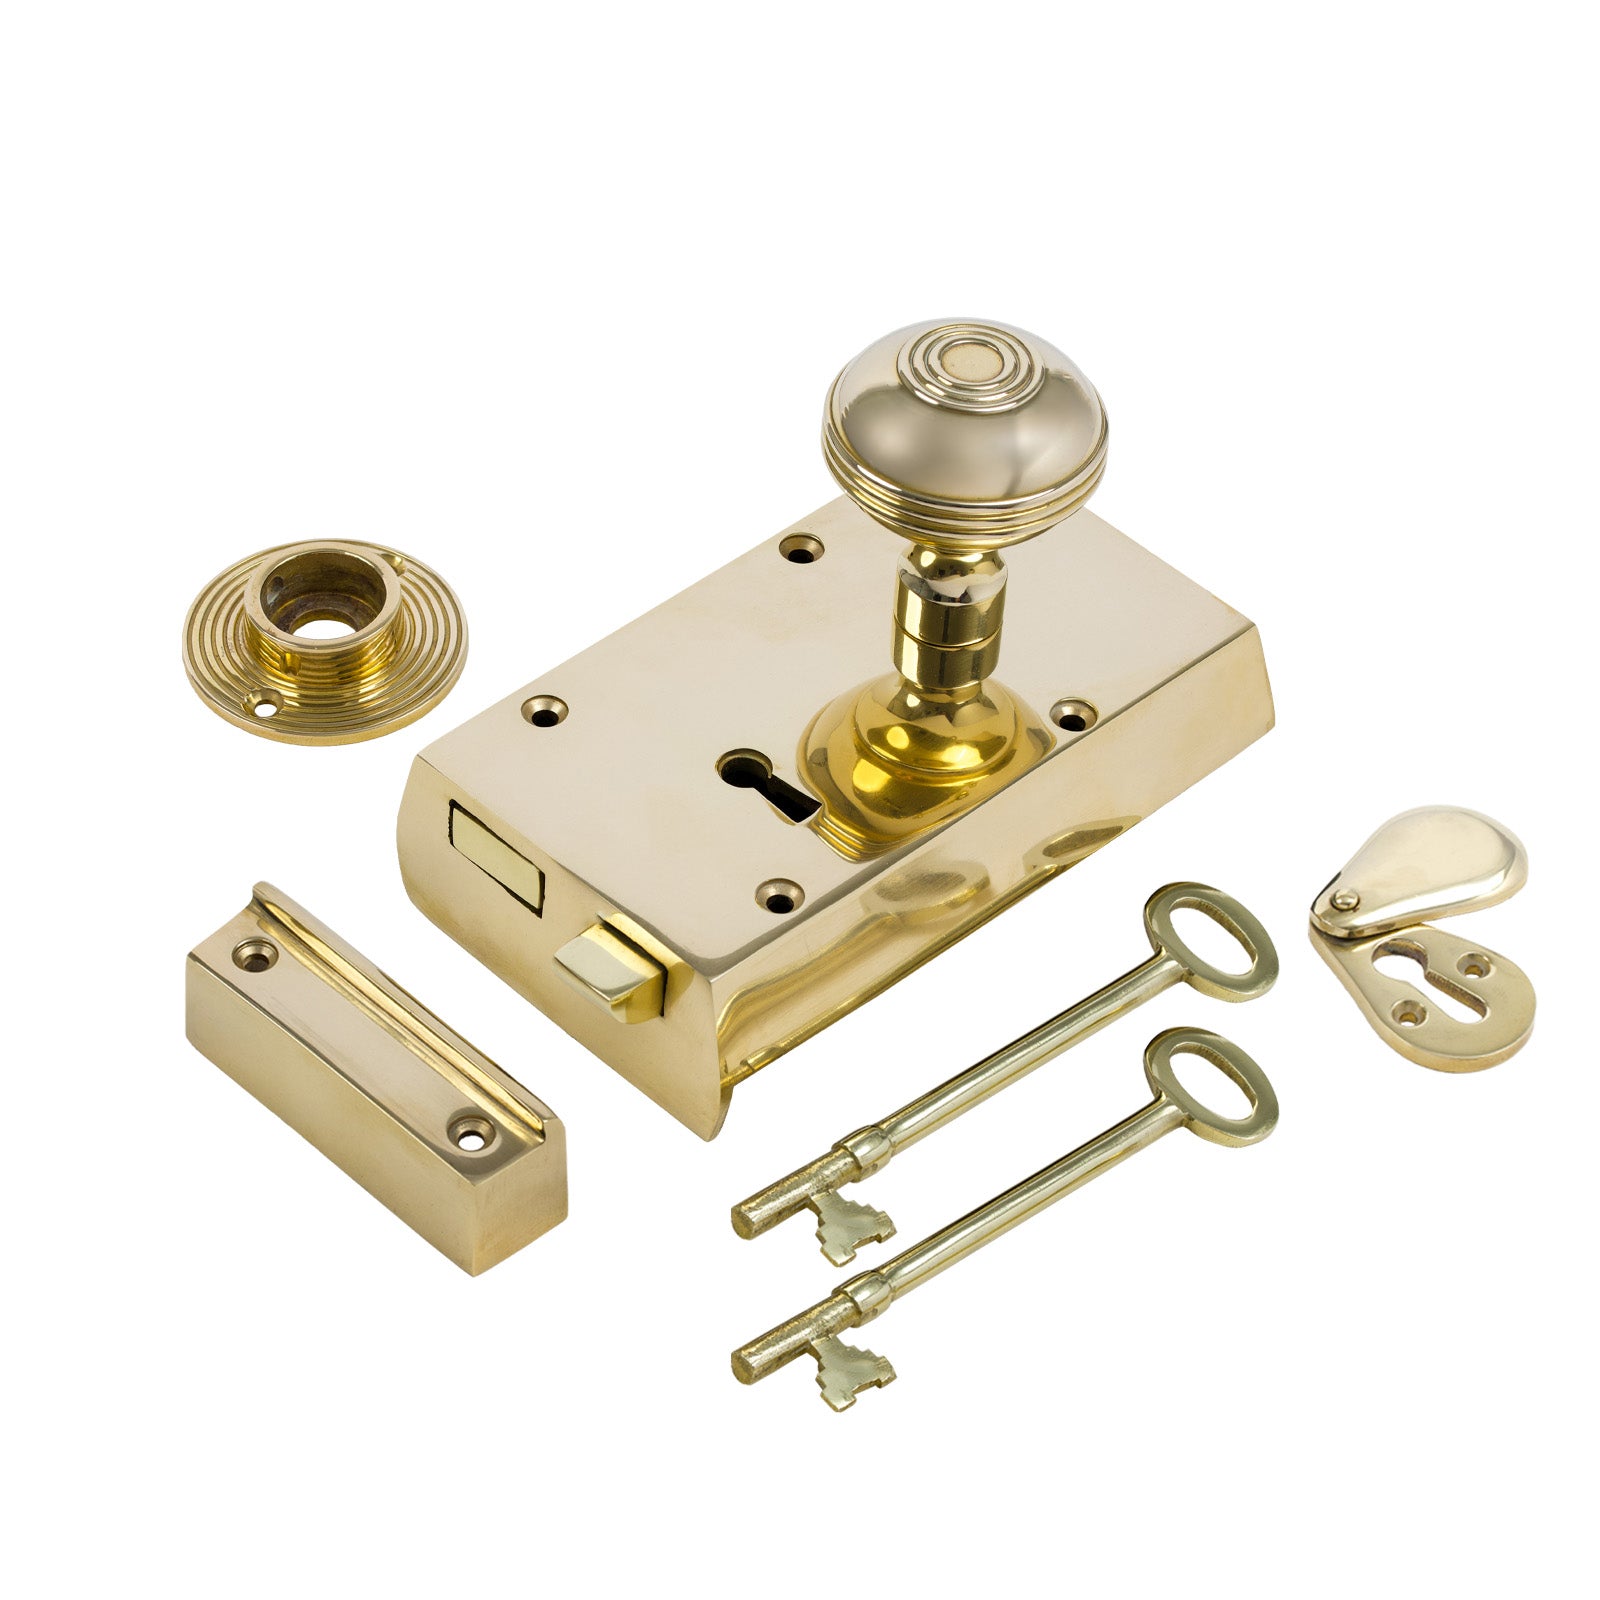 SHOW Right Handed Small Brass Rim Lock with Brass Ringed Door Knob Set